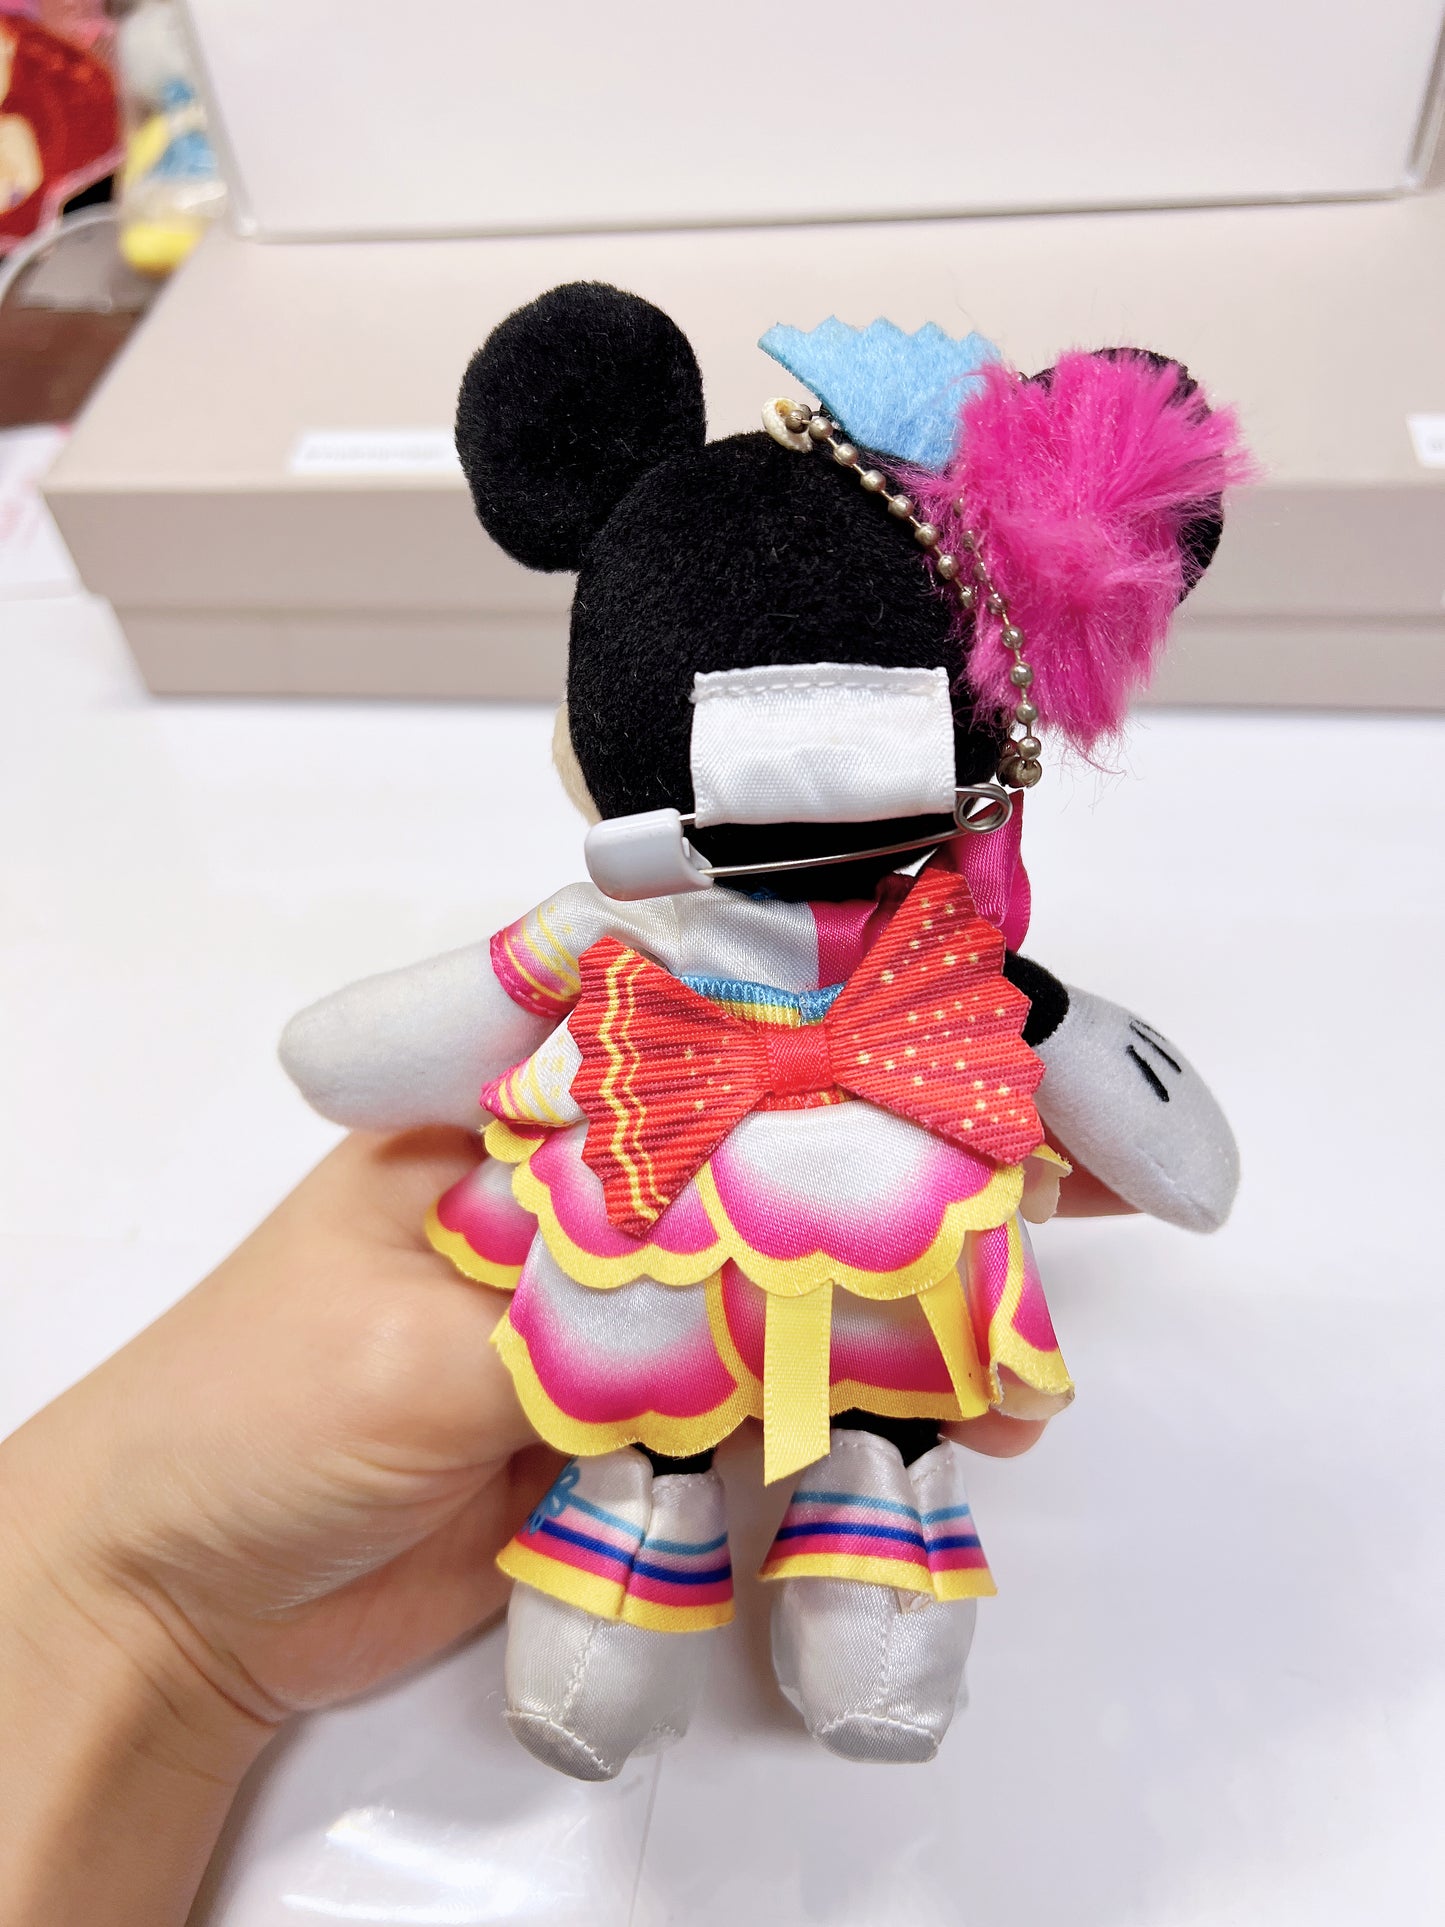 2016 Disney Tokyo Resort flower dress Minnie plush badge keychain Preowned in excellent condition available on hand